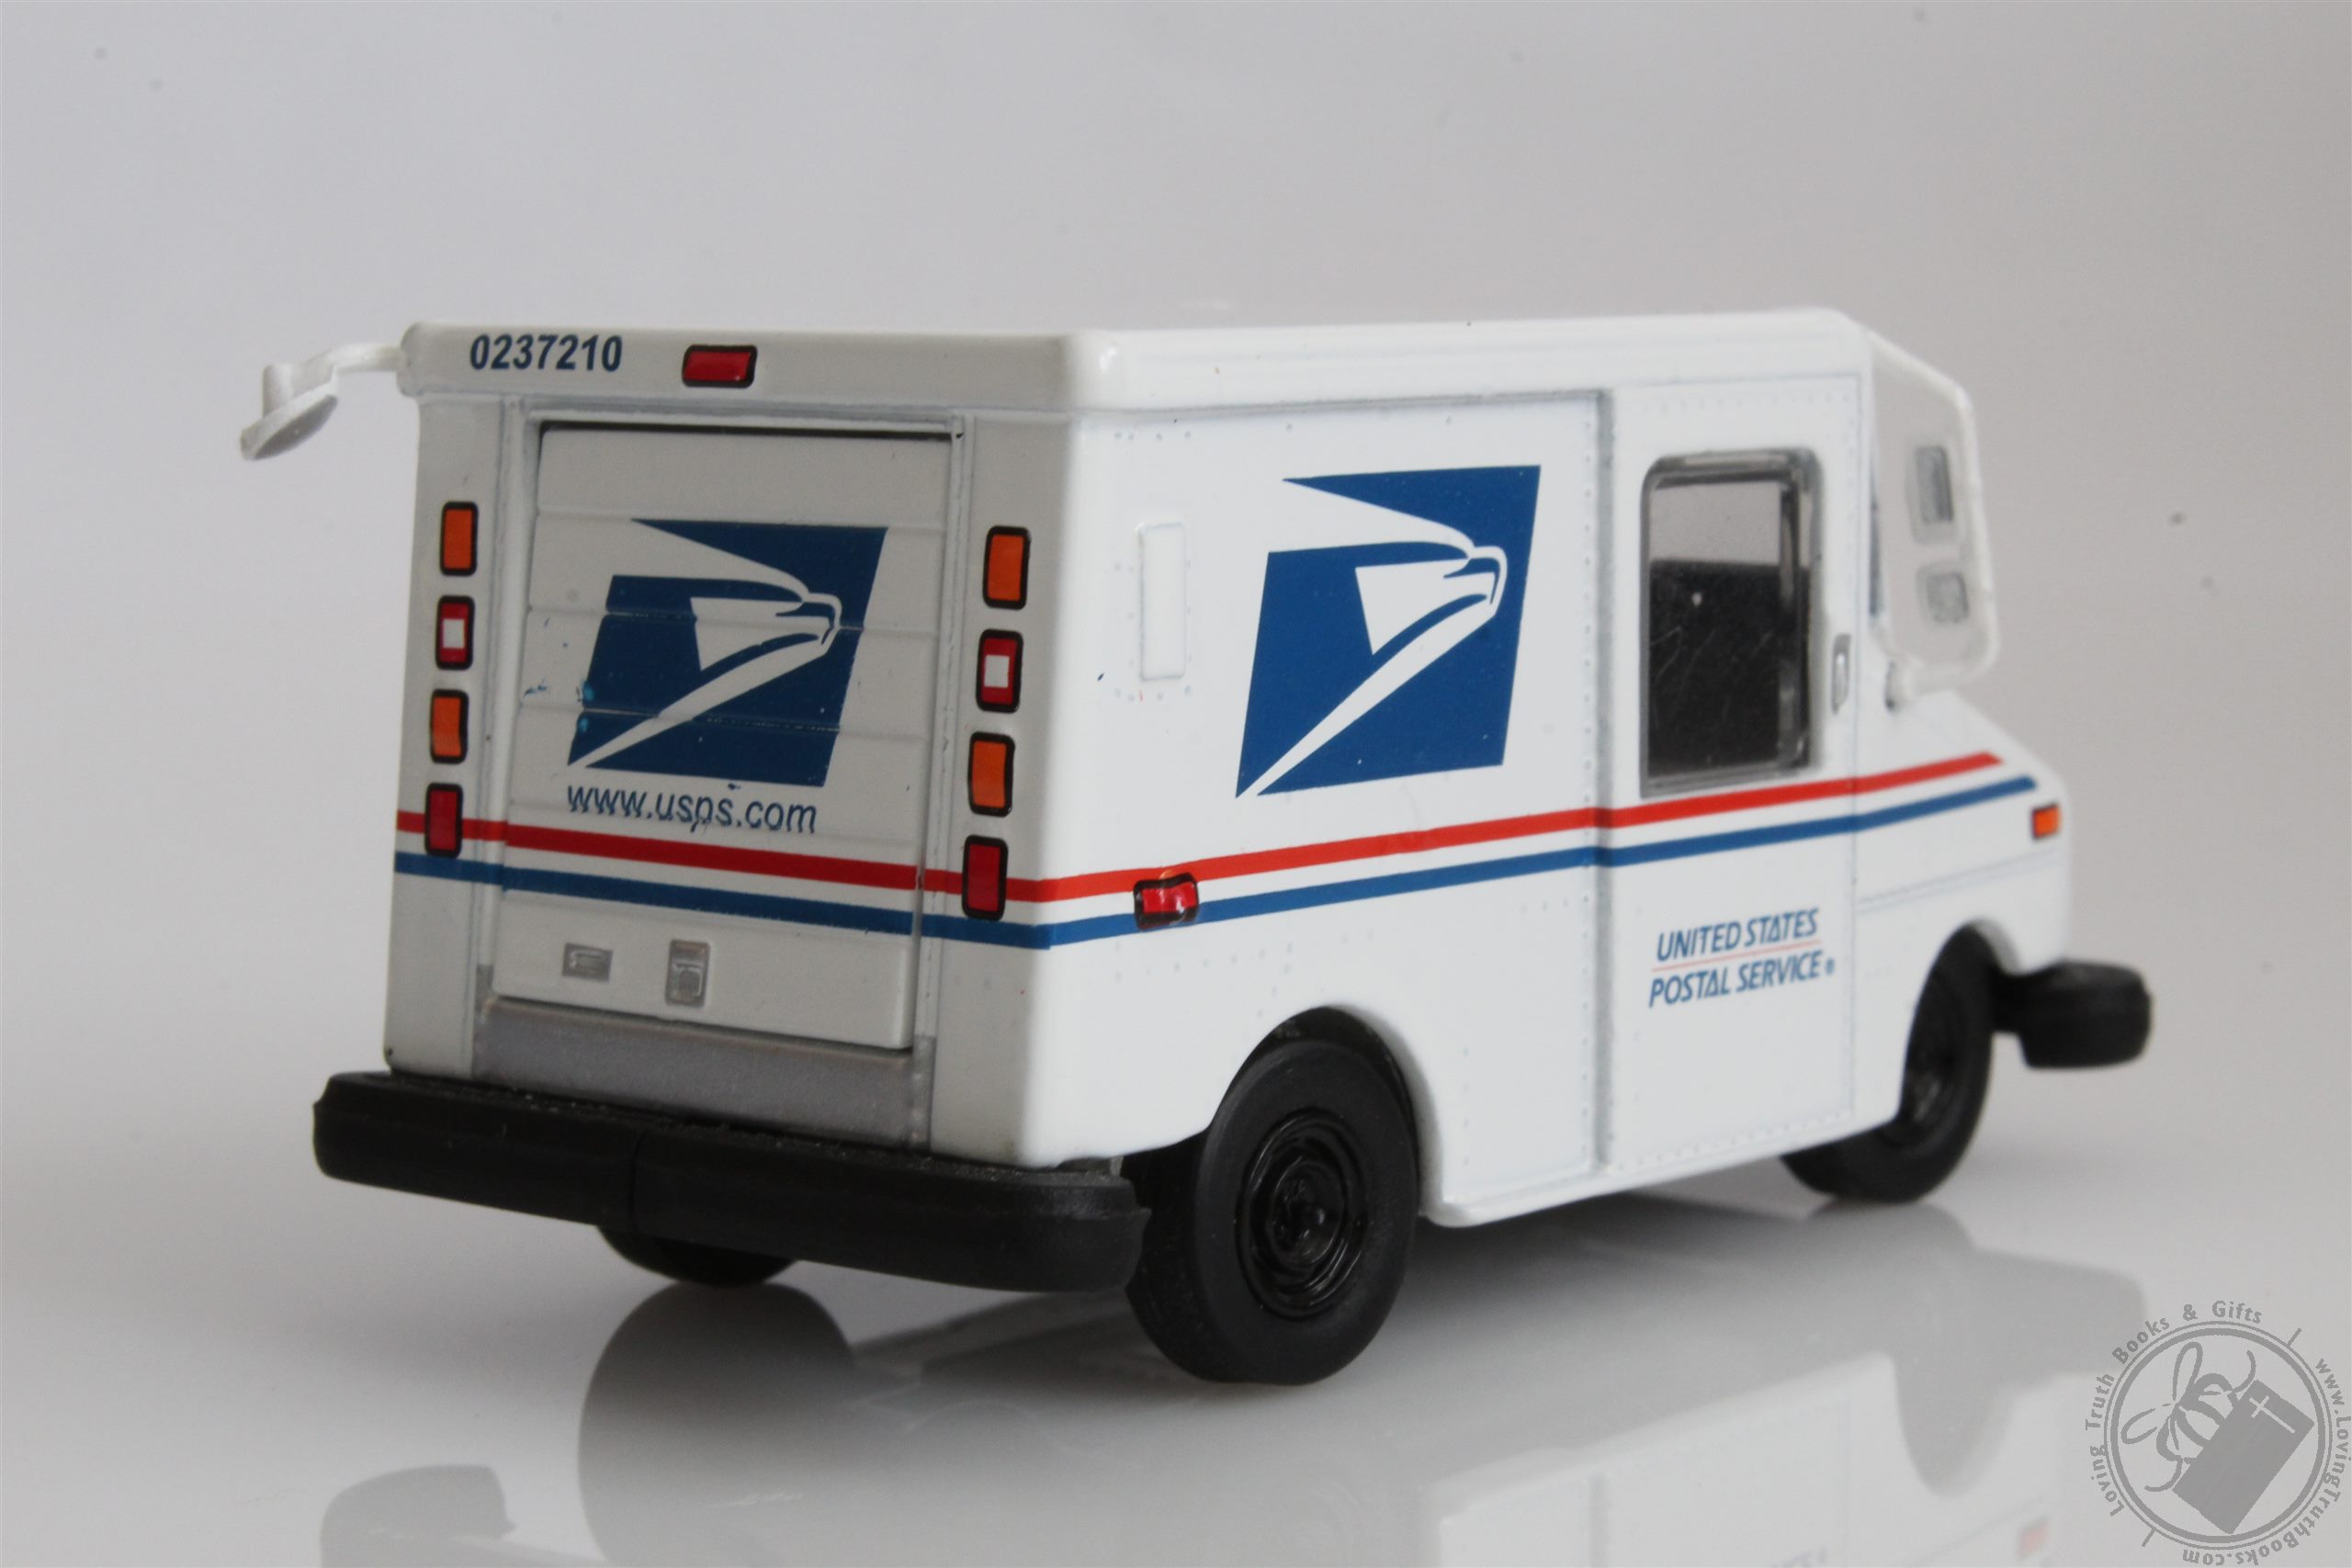 USPS Postal Service Mail Truck LLV with Mailbox 1:64 Scale Diorama Diecast Model by Greenlight ...